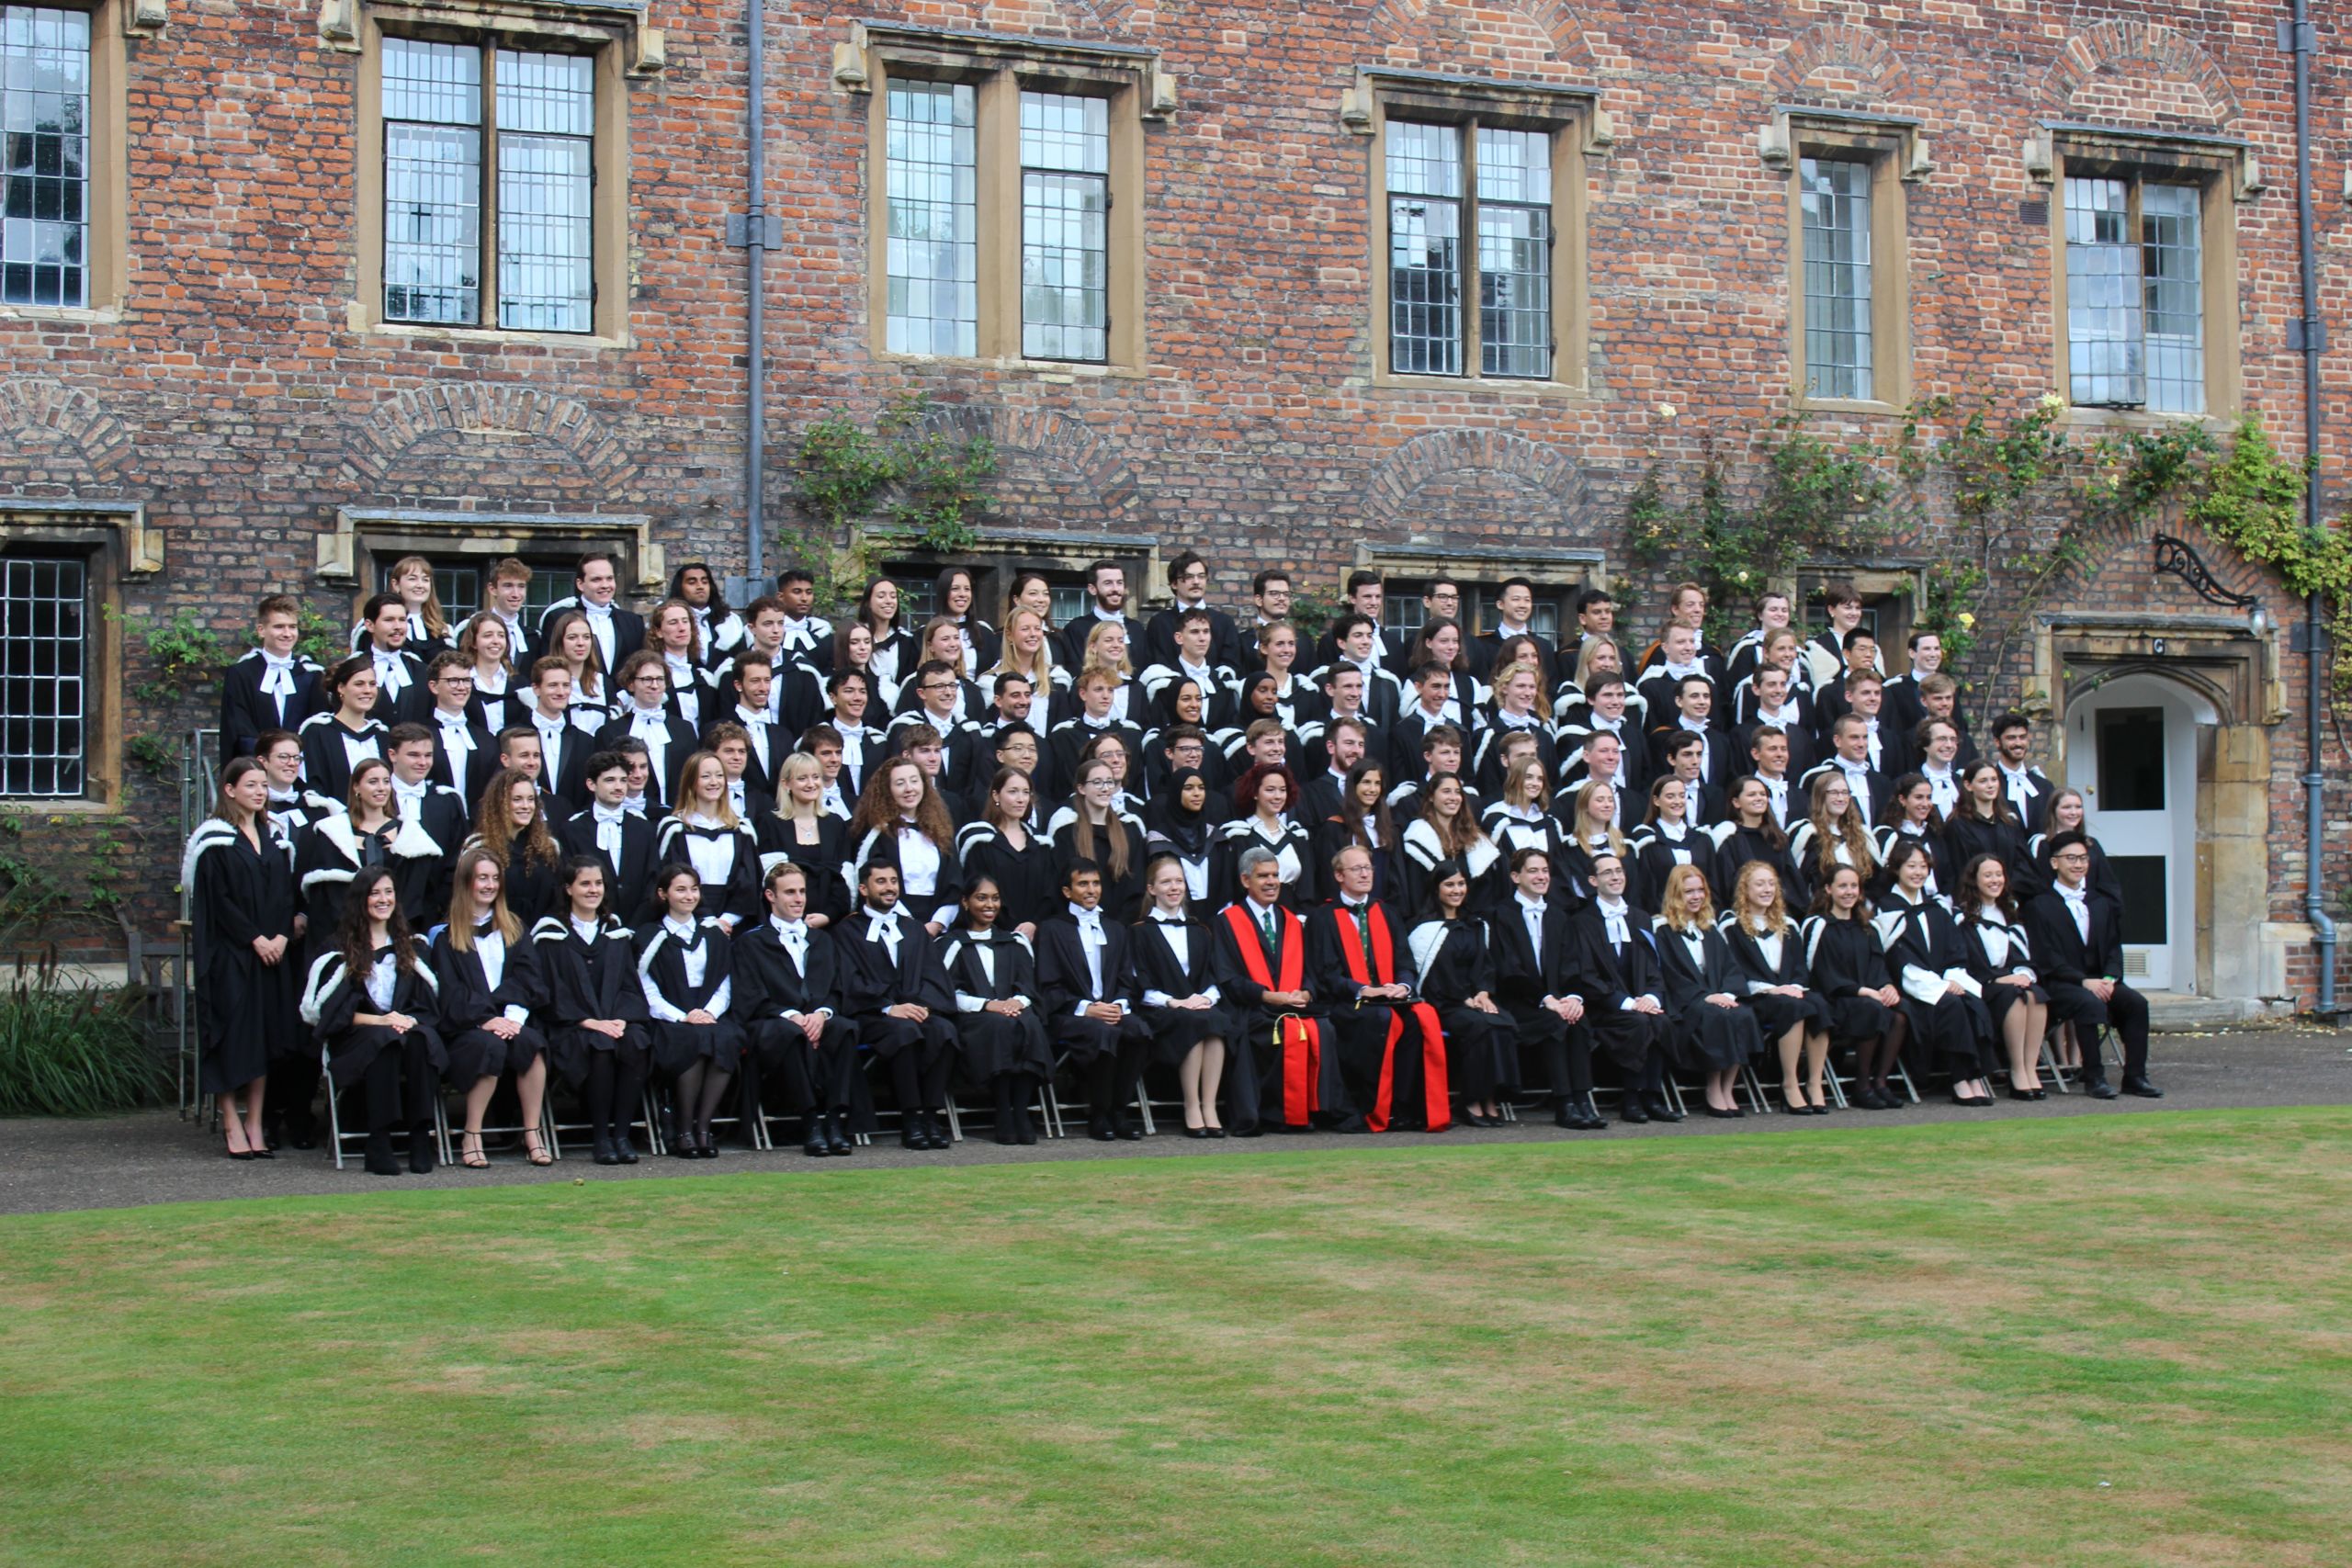 Queens' College General Admissions Ceremony - 10th September 2021